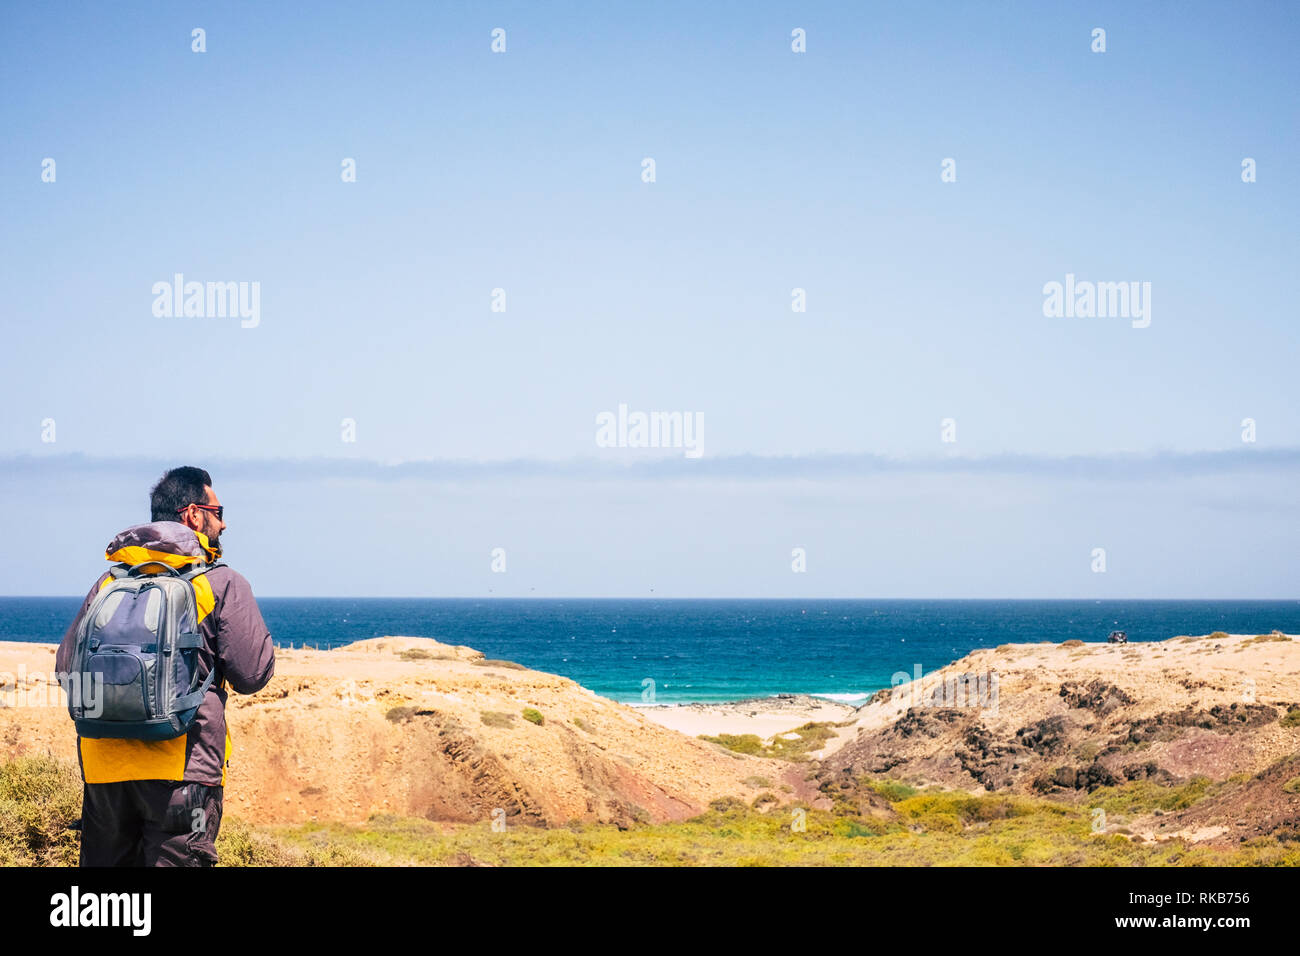 Lonely hiker backpacker man do trekking in tropical place with ocean and beach in background - enjoying nature and feel the freedom for people who lov Stock Photo